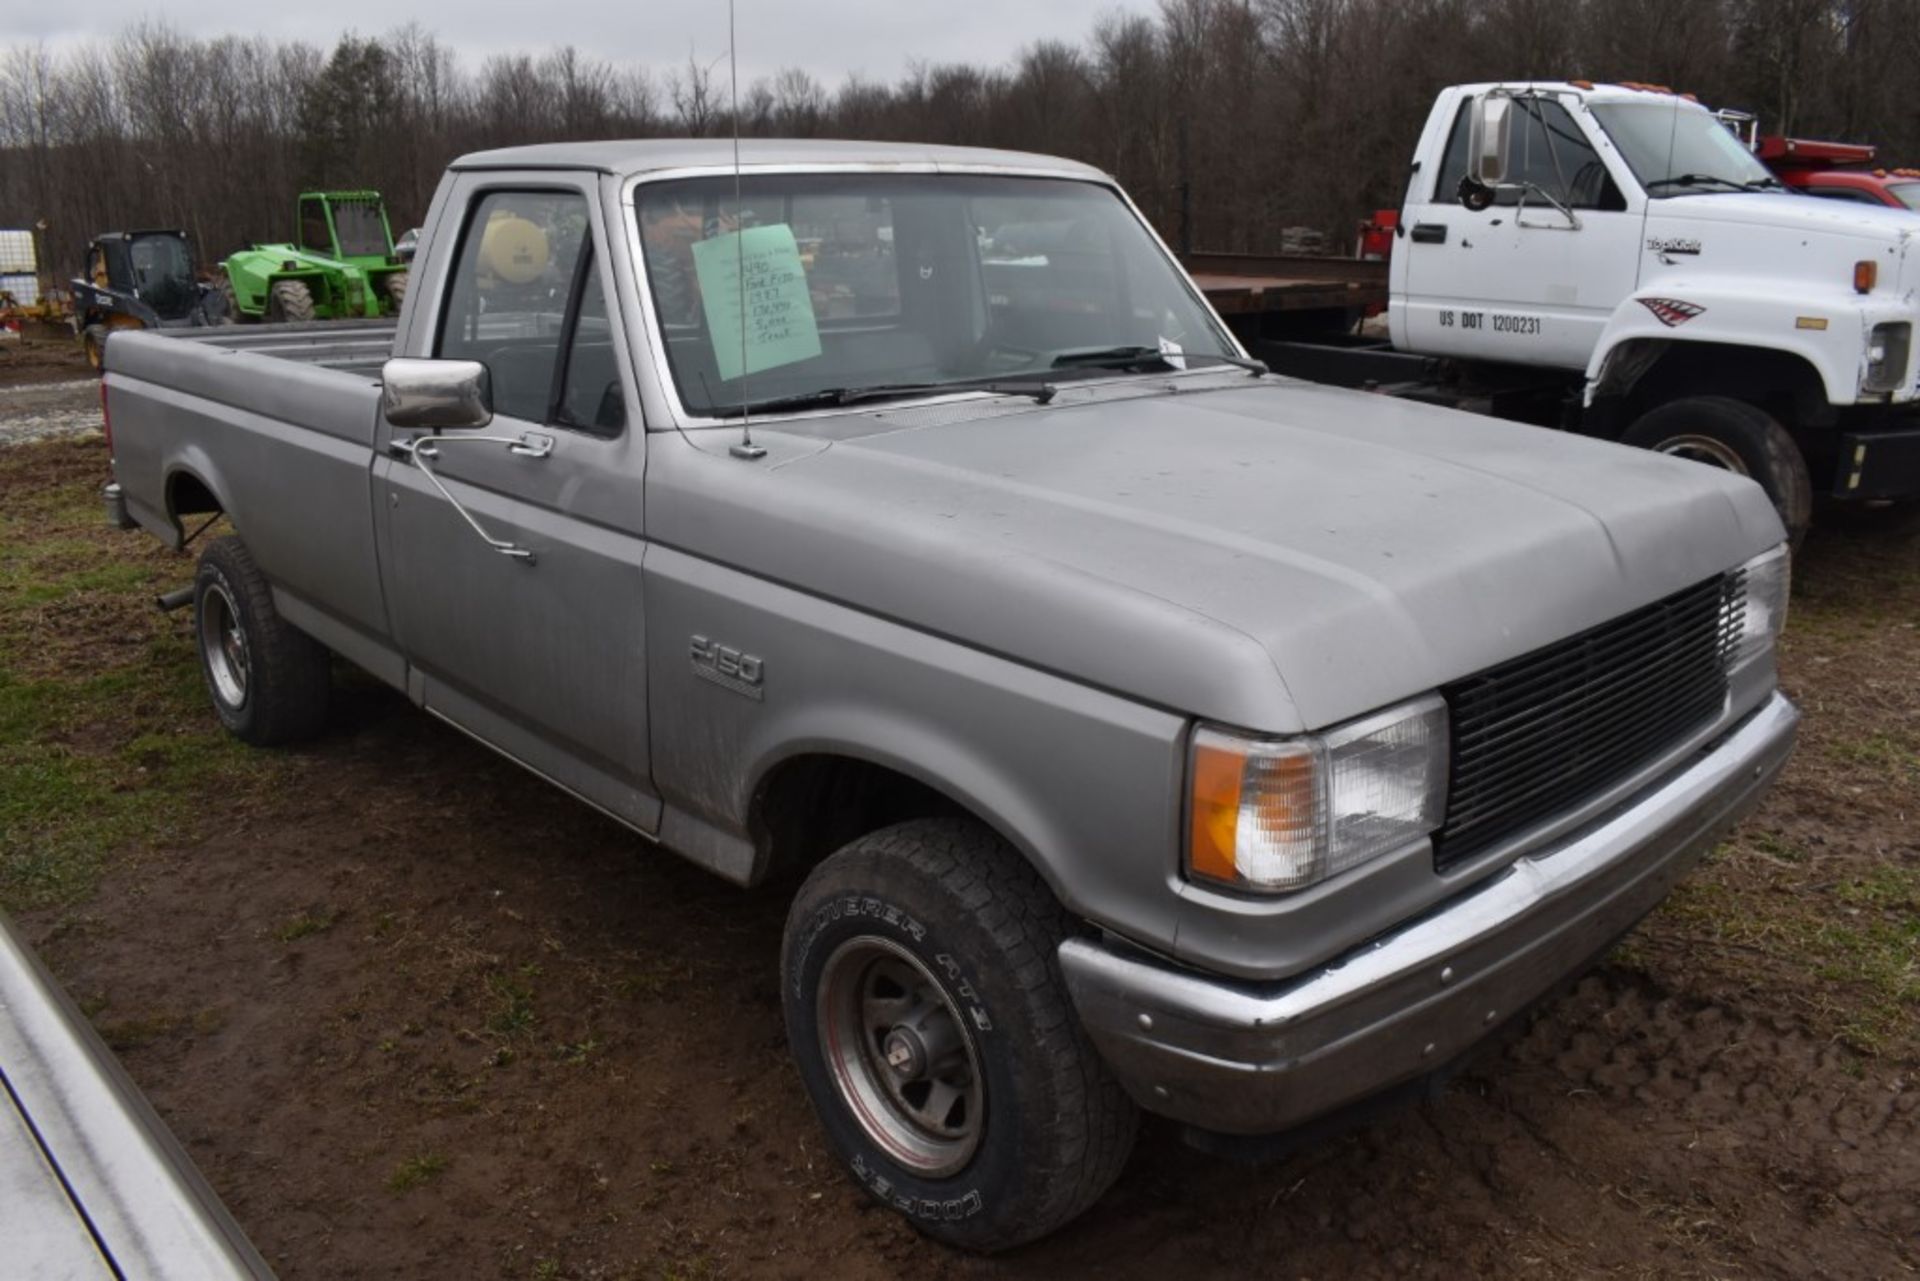 1987 Ford F-150 Truck - Image 2 of 36